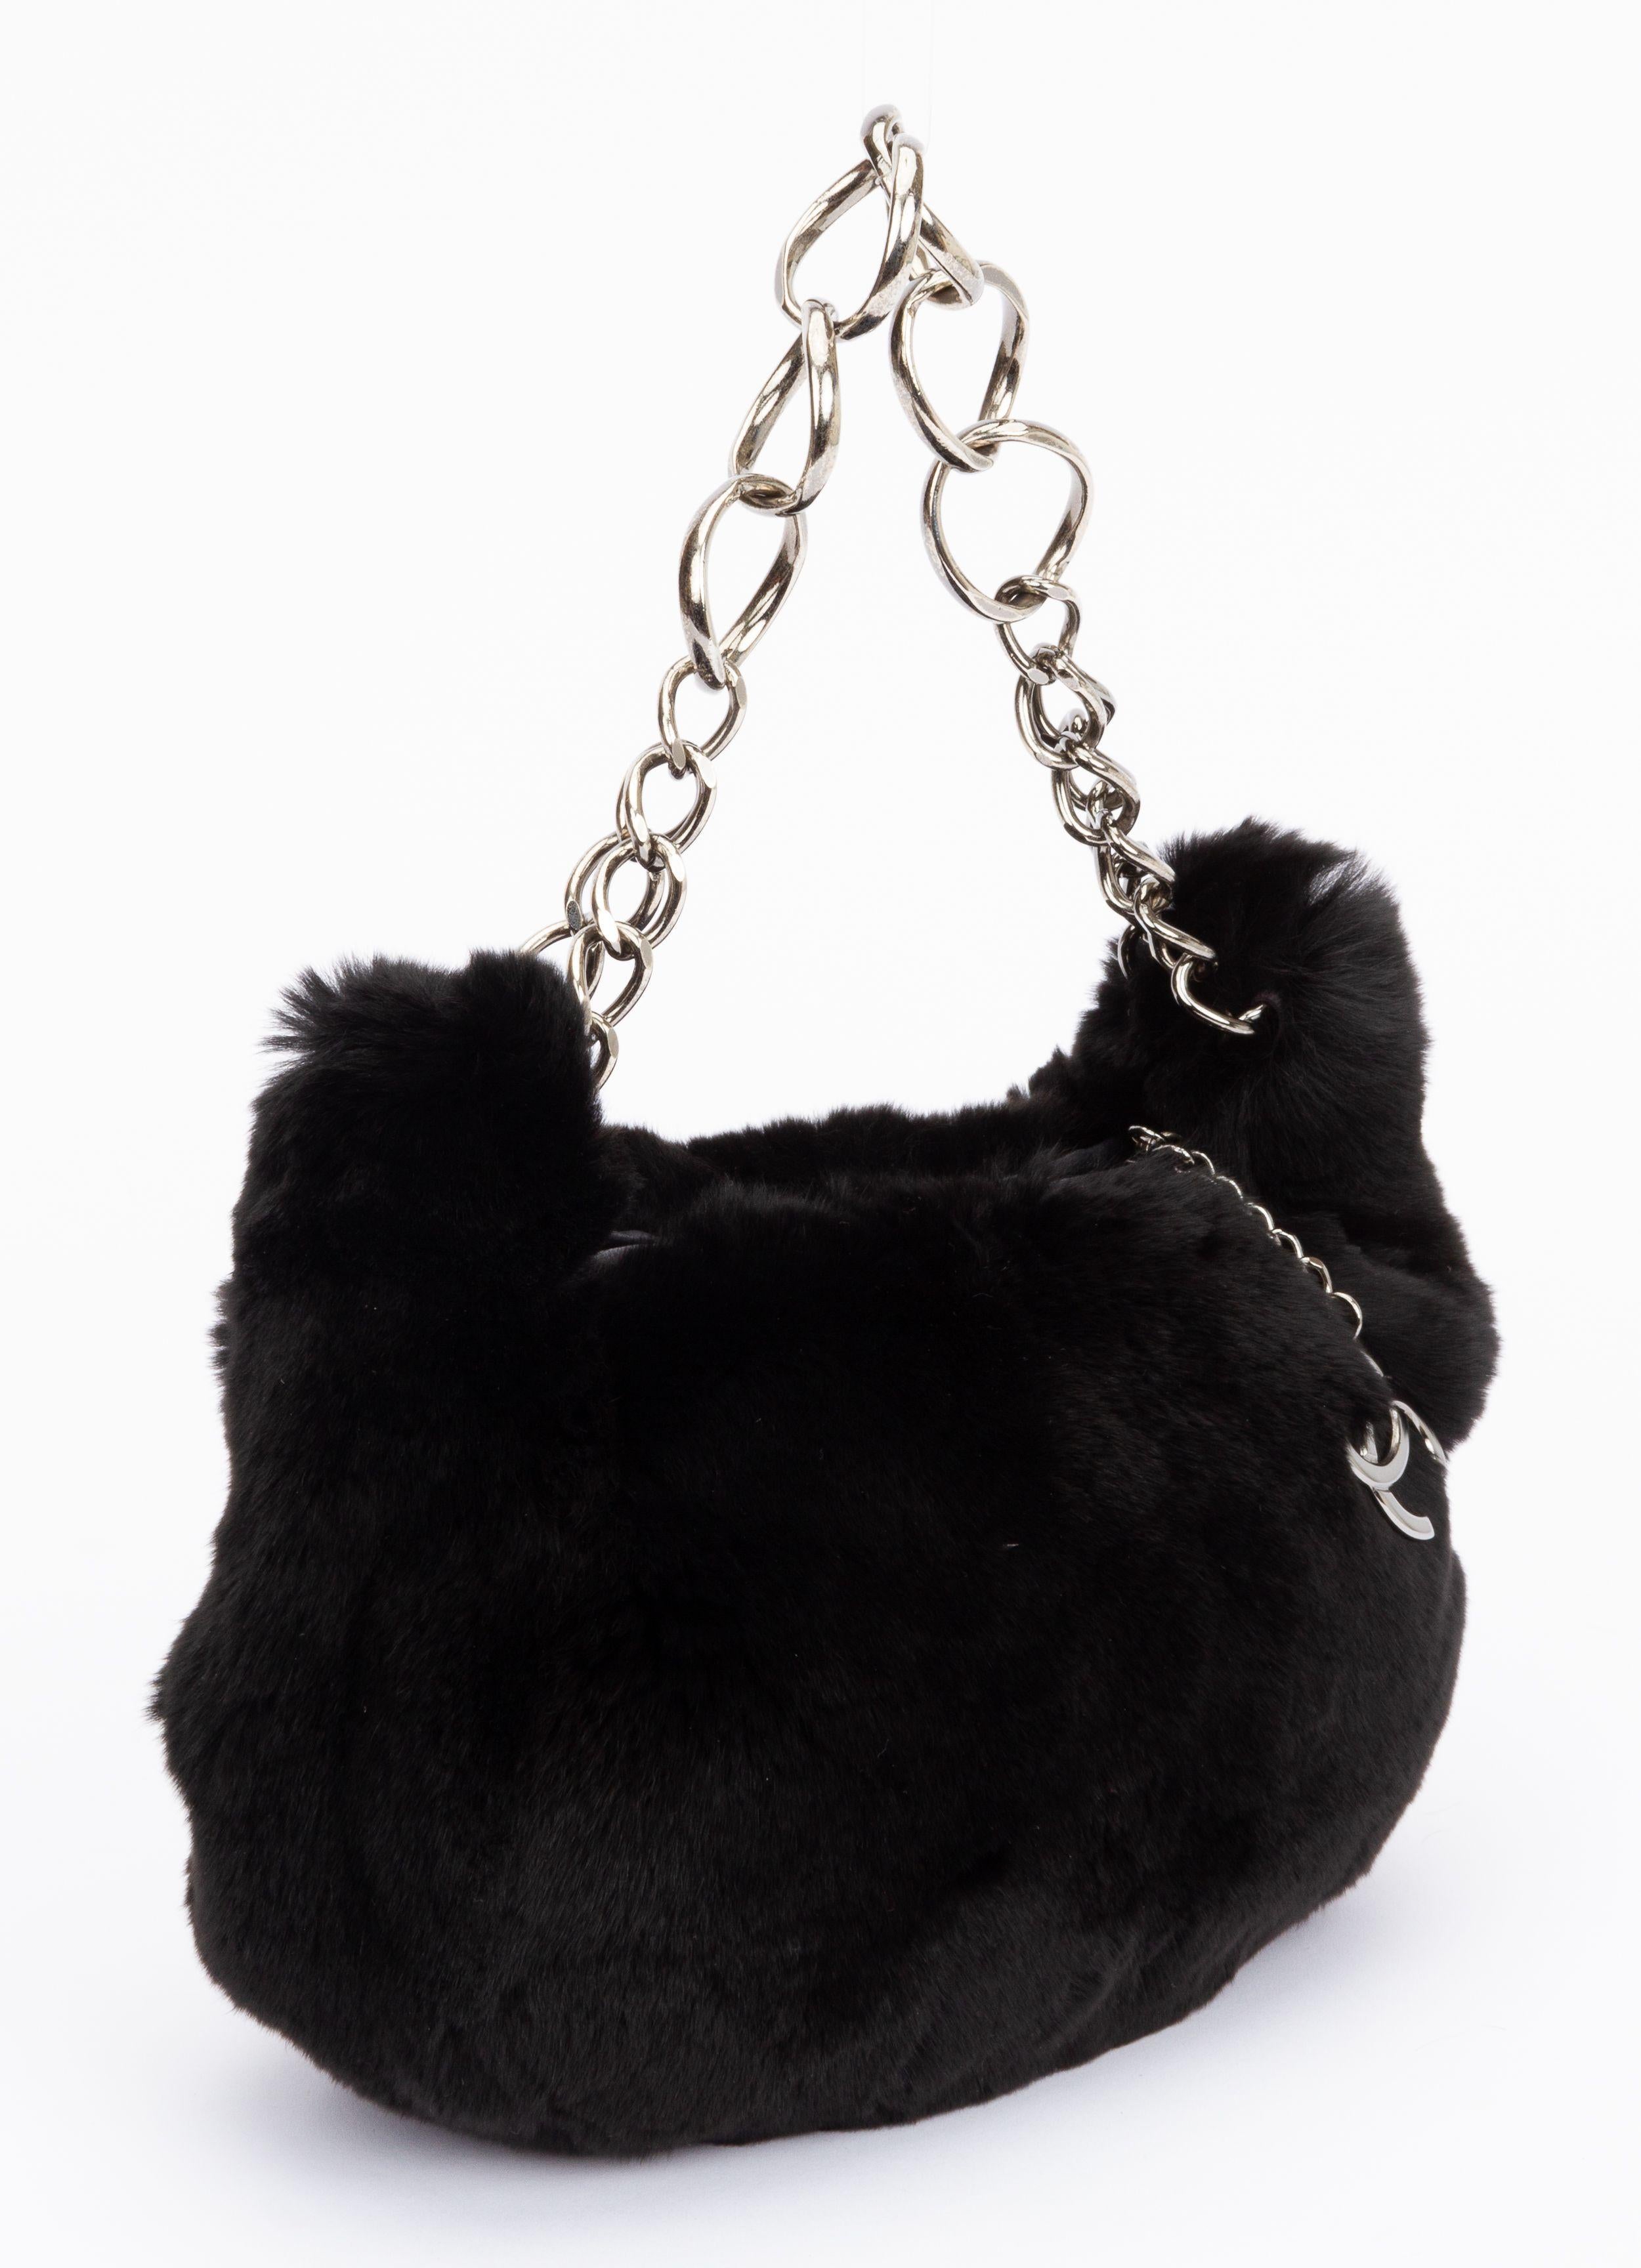 Chanel rabbit fur hobo in black. This hobo is crafted of plush rabbit fur. The bag features a silver chain link shoulder strap and a silver Chanel CC zipper pull. It opens to a Chanel CC fabric interior. The piece is in excellent condition and has